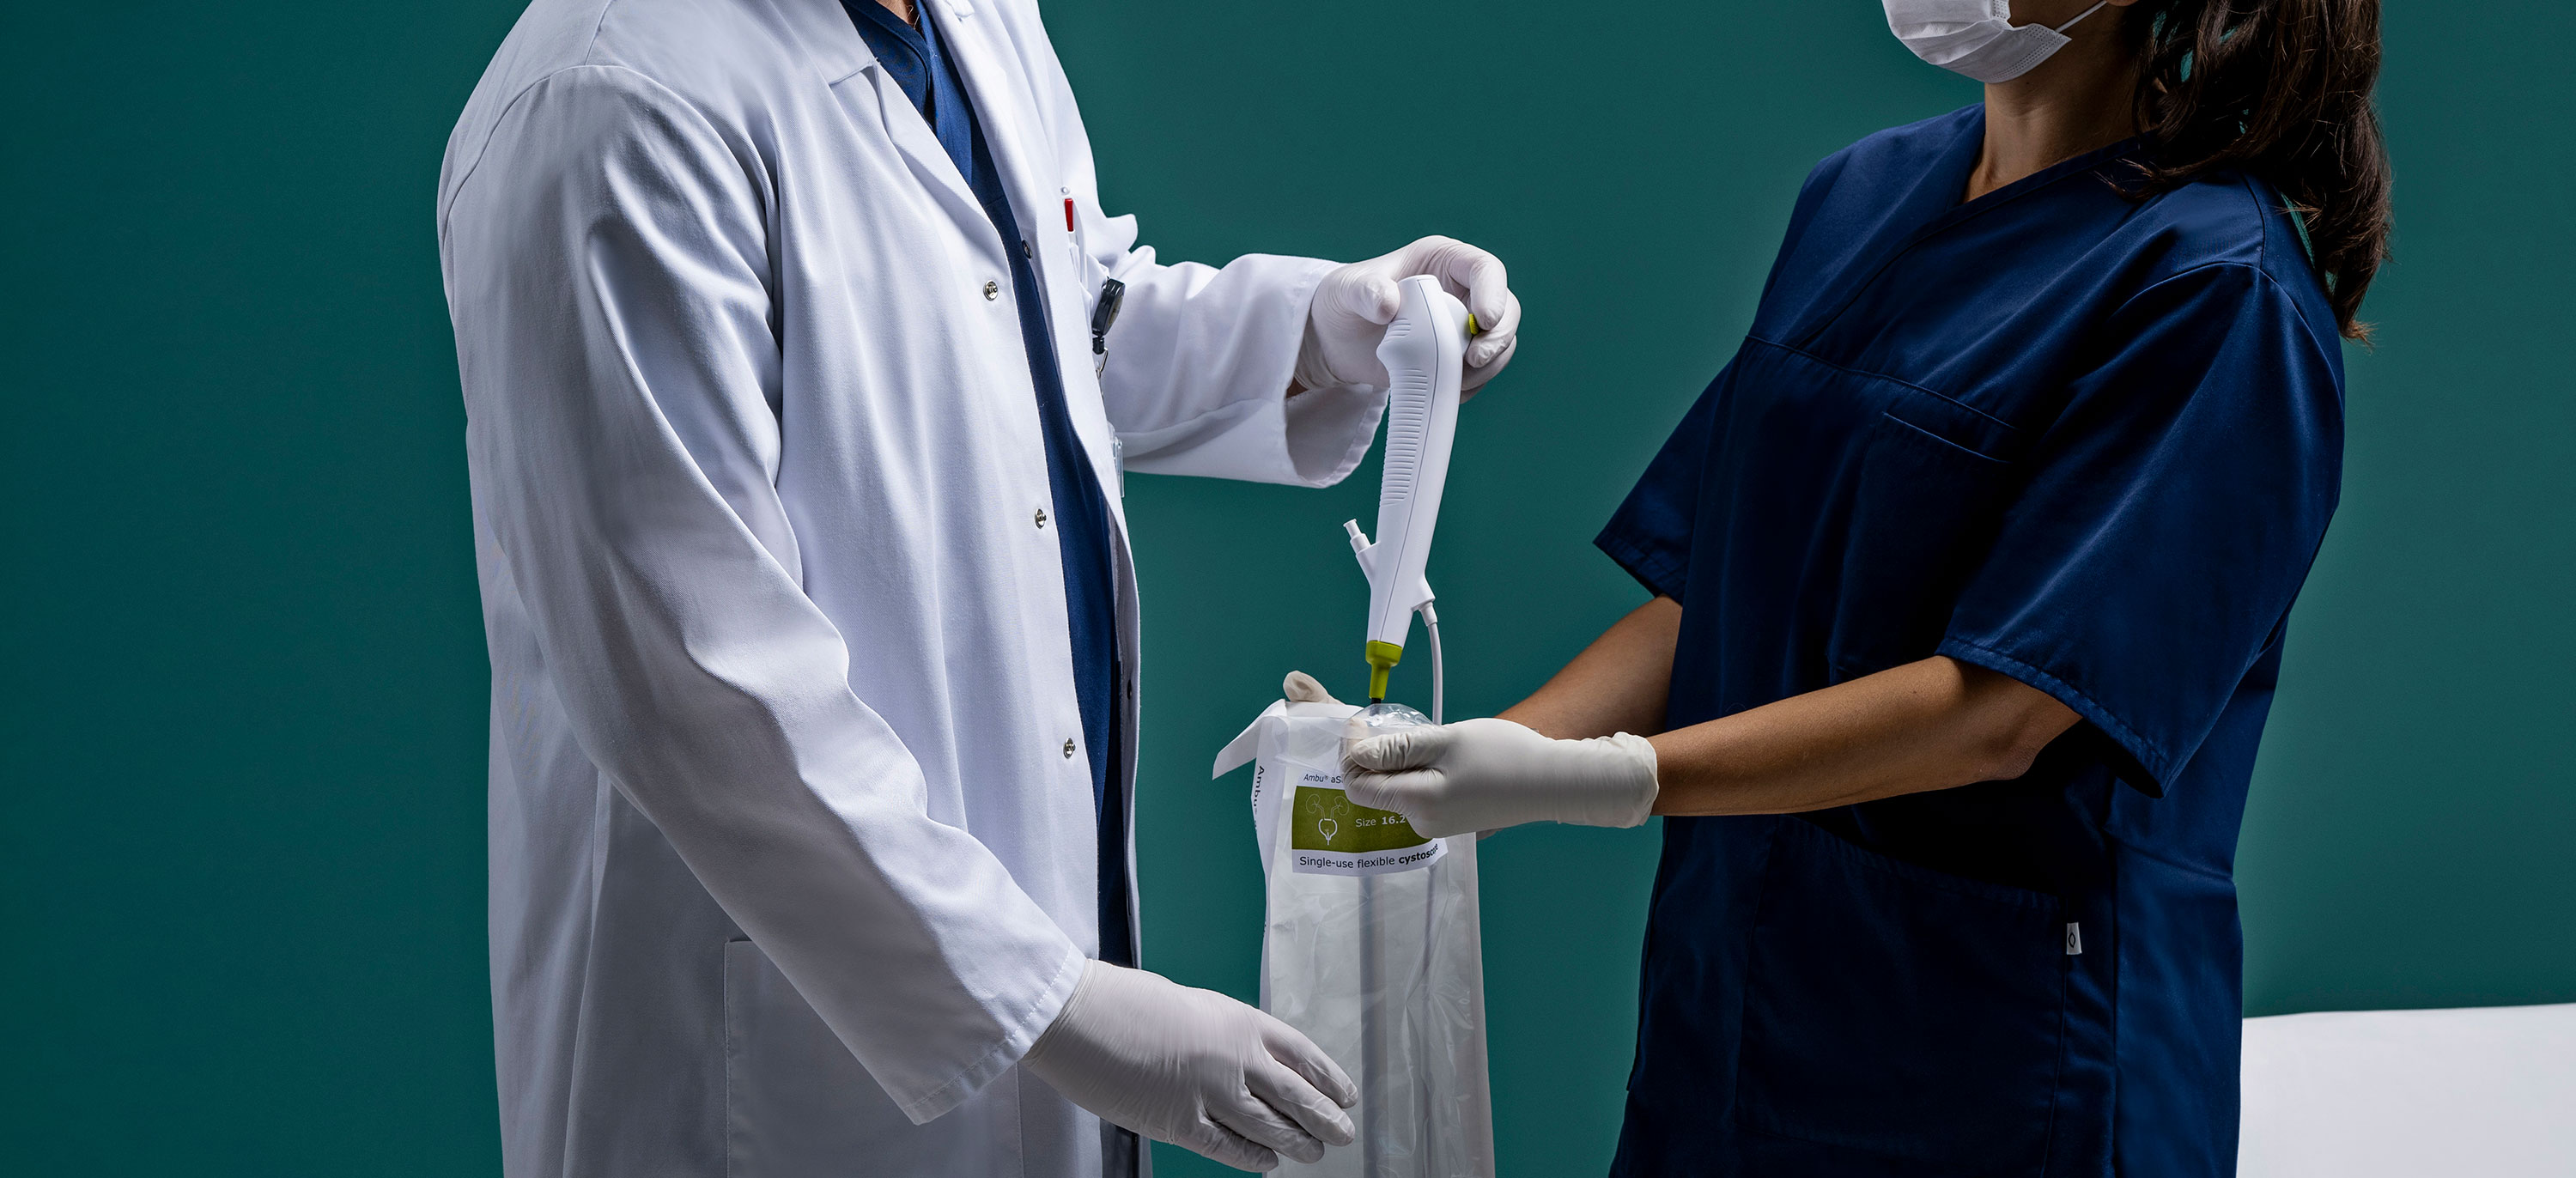 5 Questions to Consider When Procuring Endoscopes for Your Healthcare Facility